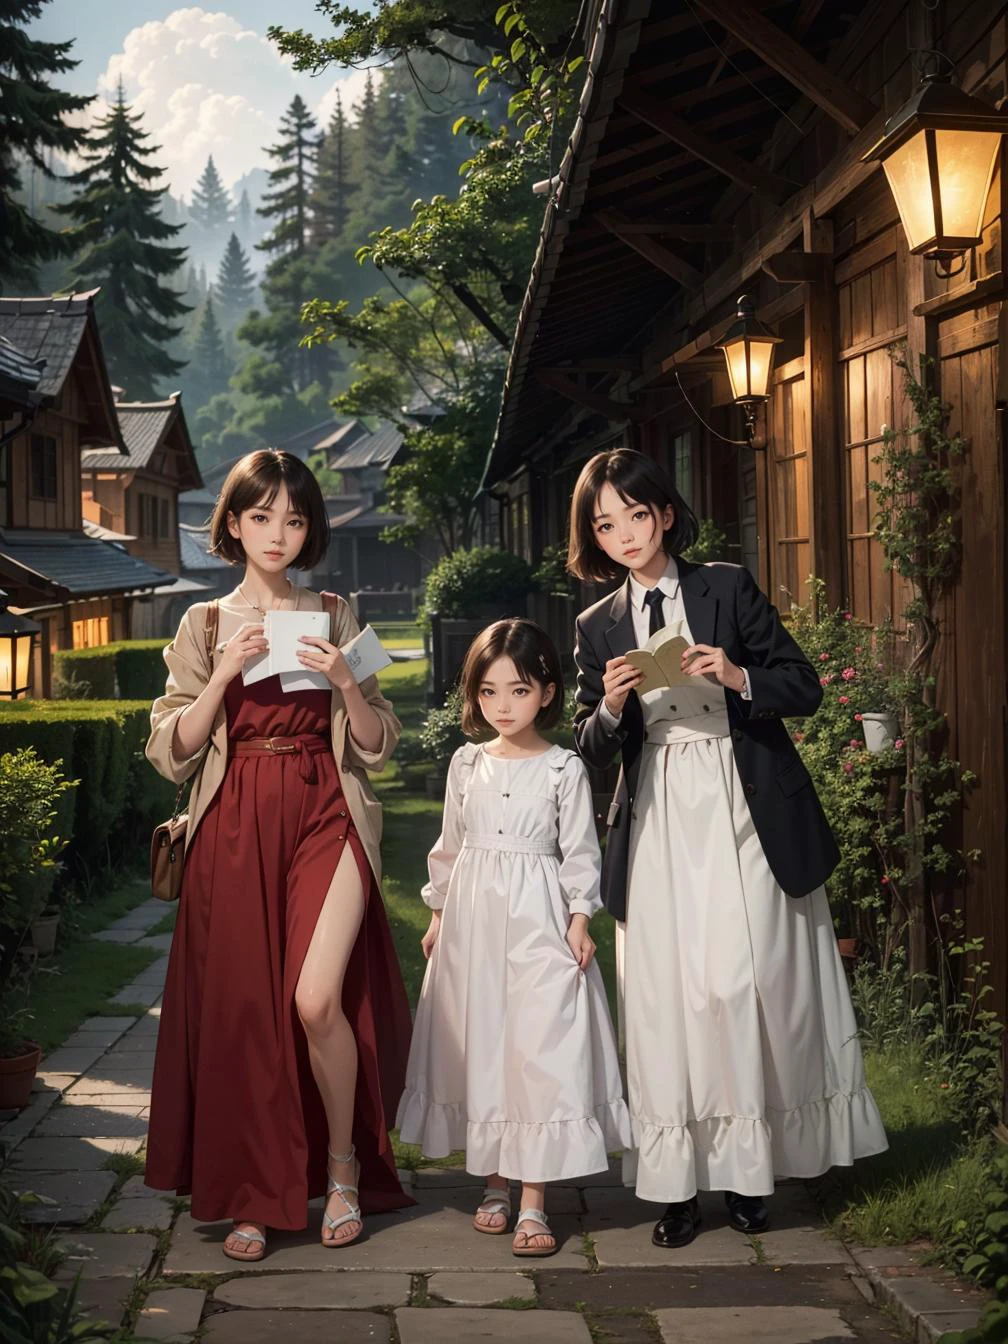 multiple girls, 3girls,books,short hair,smug
4K image, an elegant woman, hair braided like intertwining vine, eyes reflecting wisdom. She wears a dress made from woven leaves, standing in a mystical forest where animals converse and trees walk. The scene, under a moonlit night, in the style of Hayao Miyazaki's animation.
masterpiece, best quality, official art,